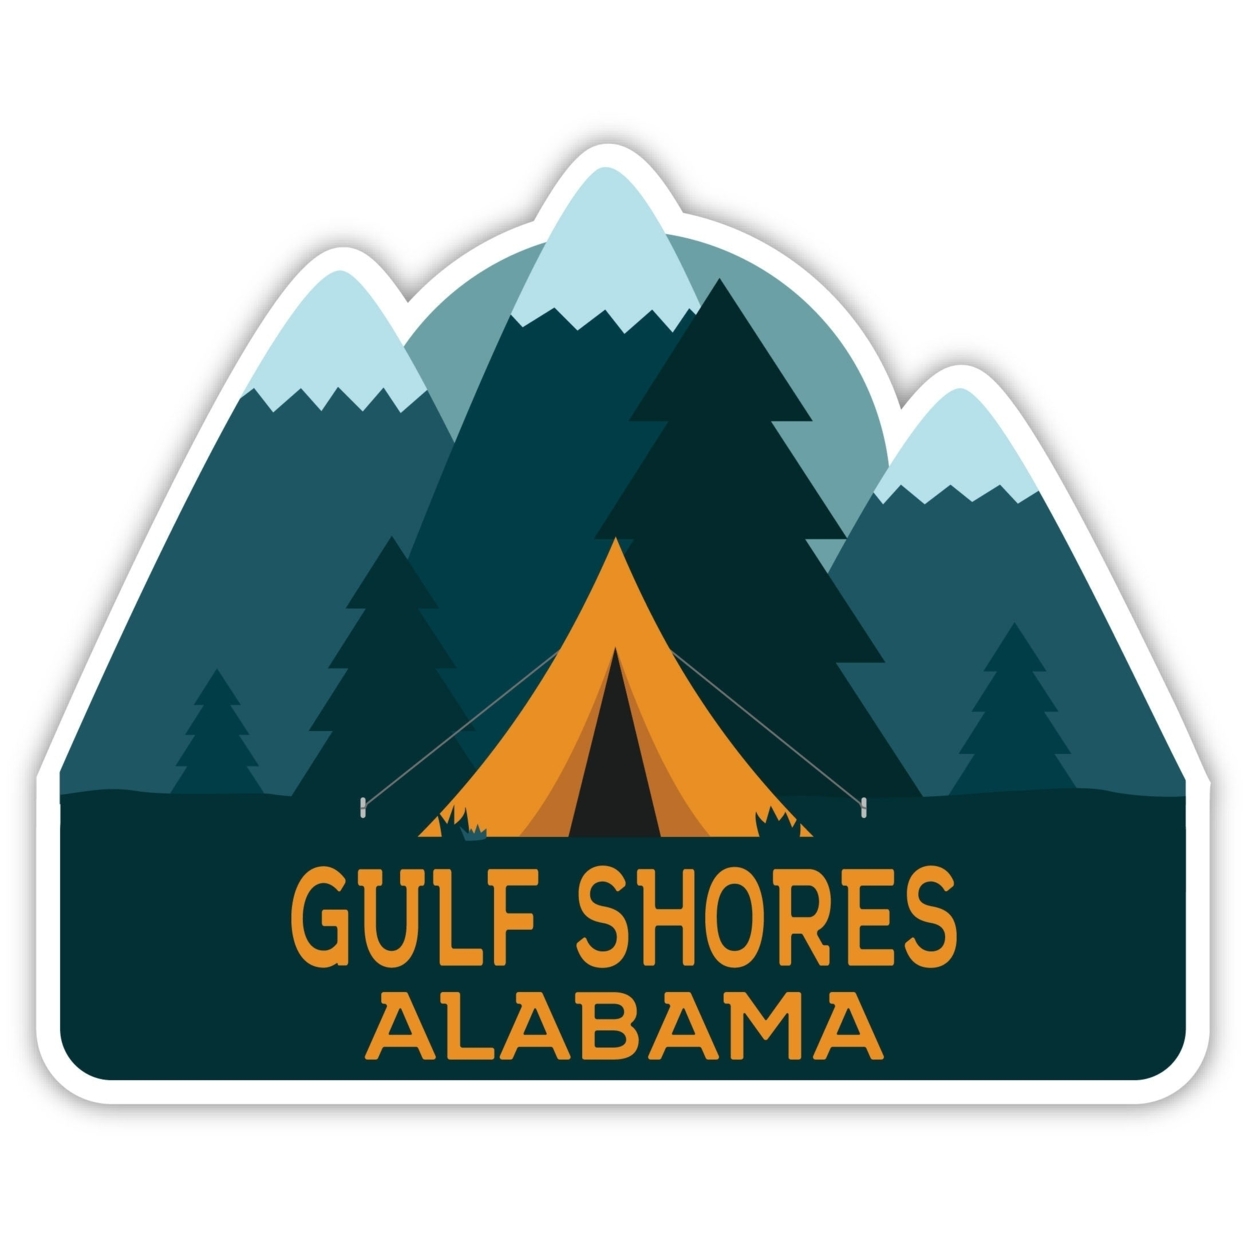 Gulf Shores Alabama Souvenir Decorative Stickers (Choose Theme And Size) - 4-Pack, 8-Inch, Great Outdoors